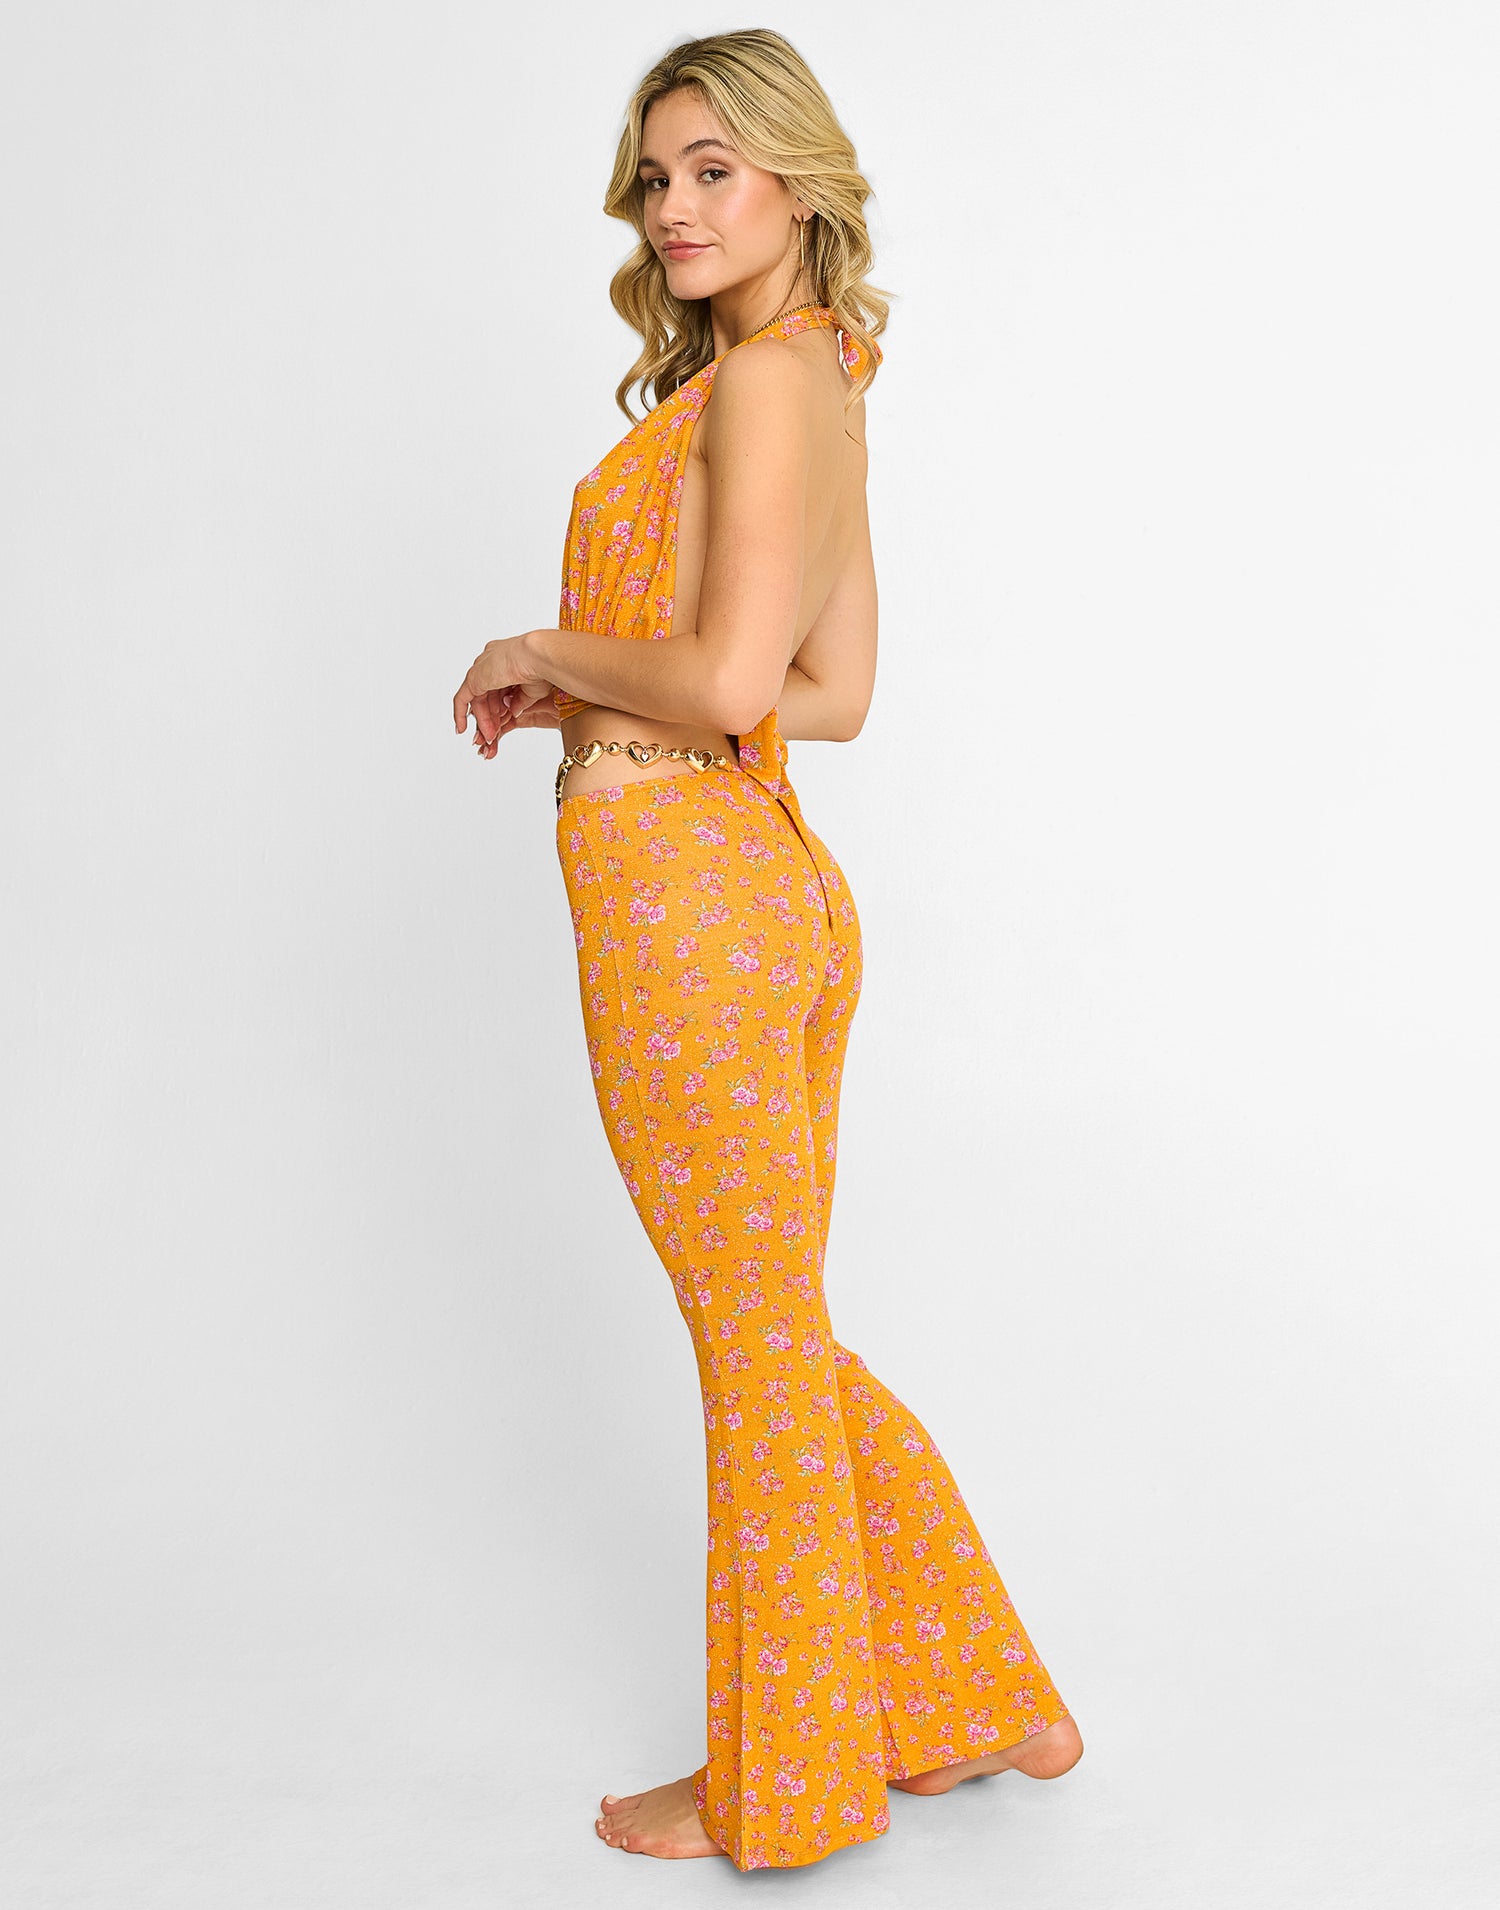 Saddie Mesh Wrap Top Cover Up in Orange Ditsy Floral - Back View